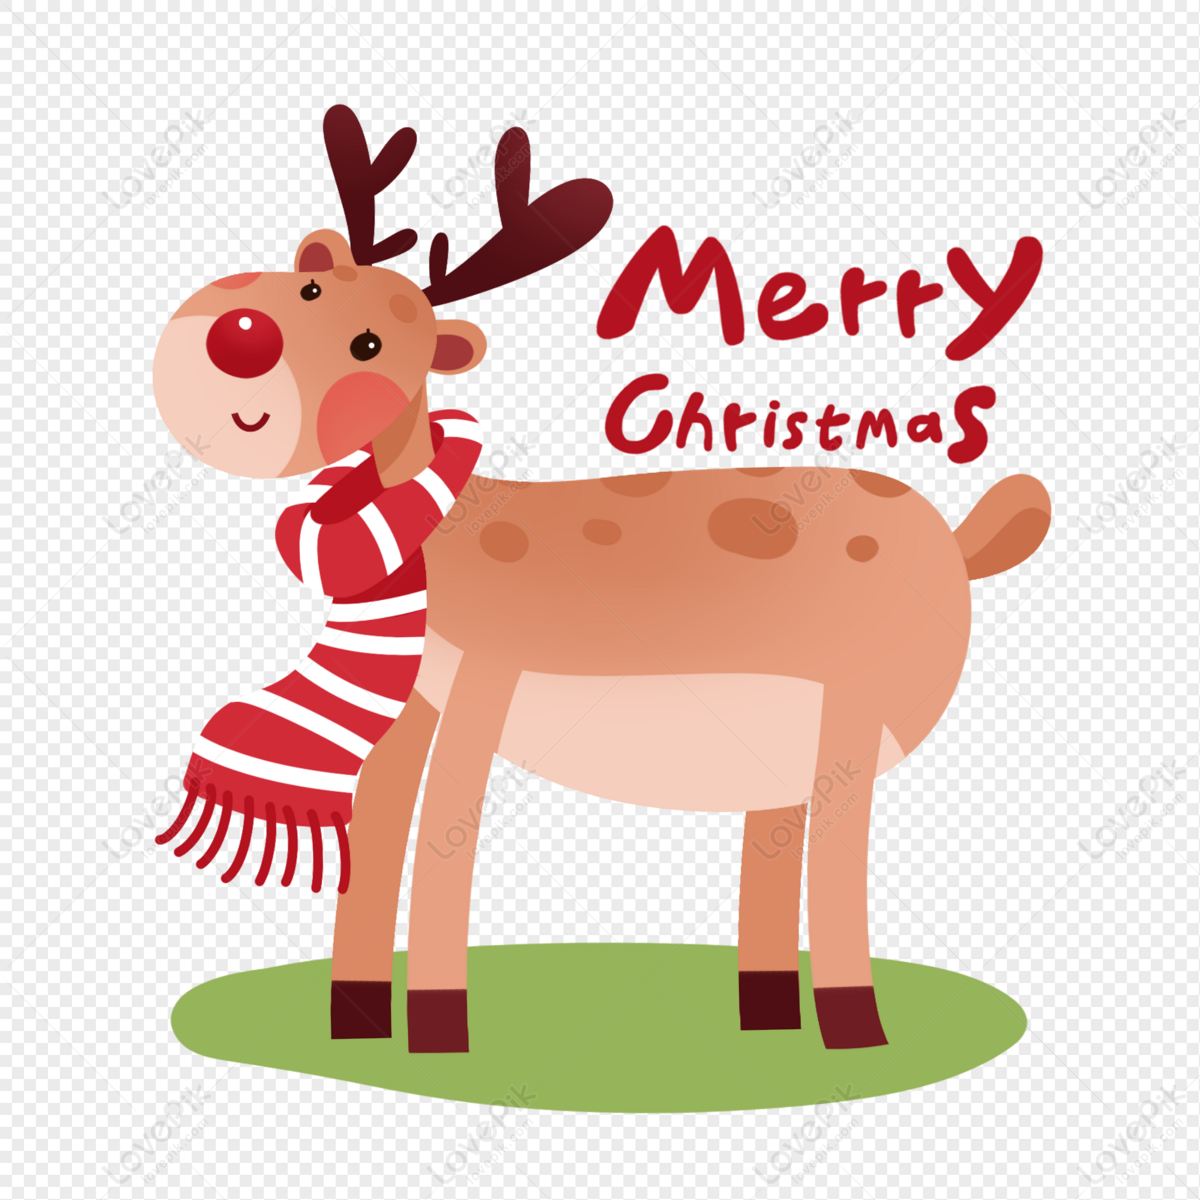 Cartoon Christmas Reindeer PNG Hd Transparent Image And Clipart Image For  Free Download - Lovepik | 401660664